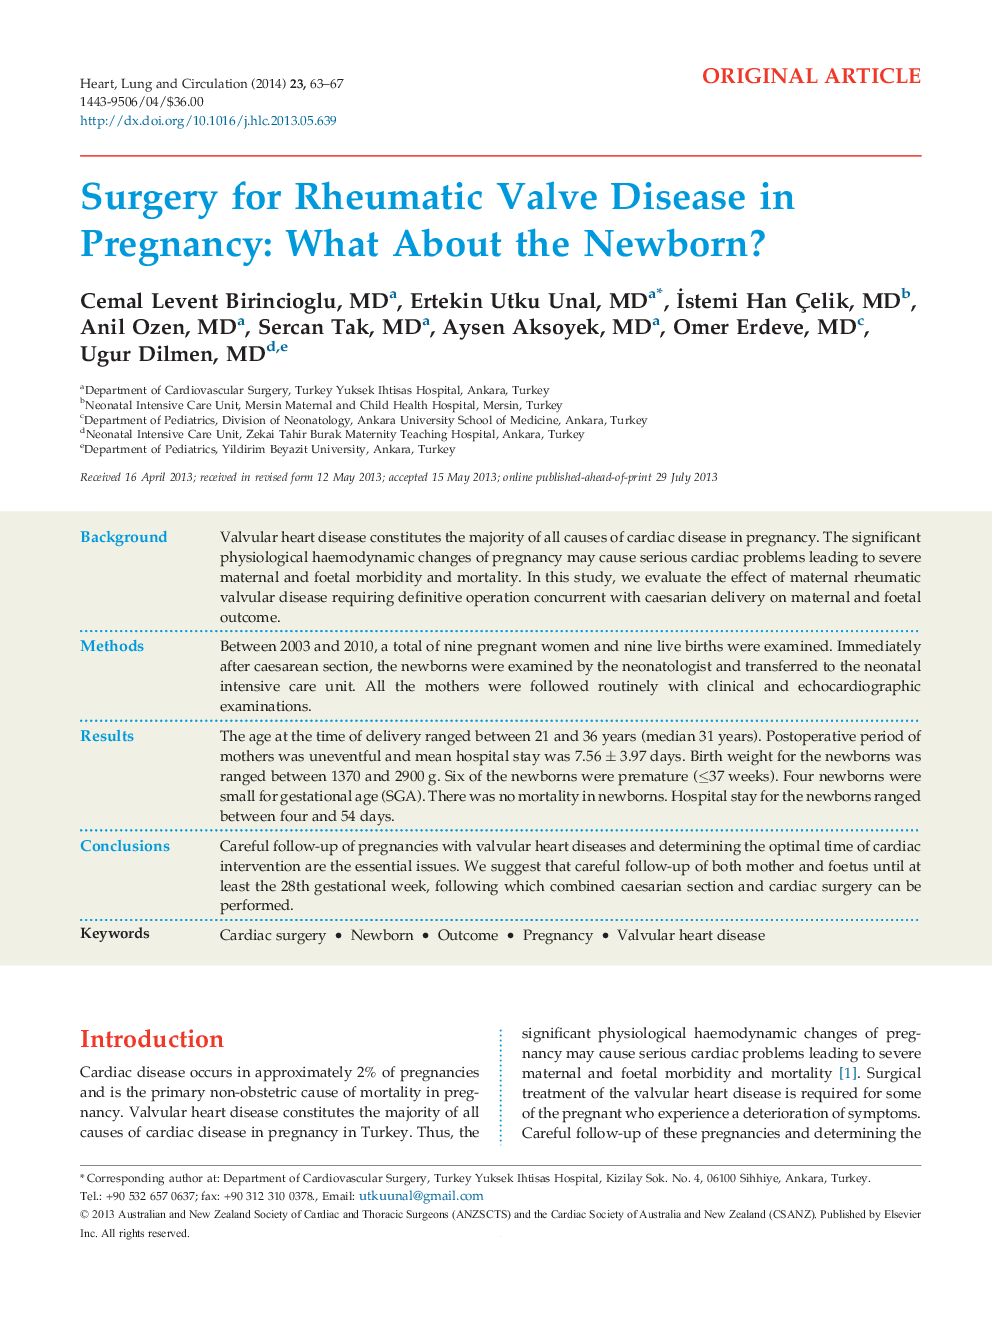 Surgery for Rheumatic Valve Disease in Pregnancy: What About the Newborn?